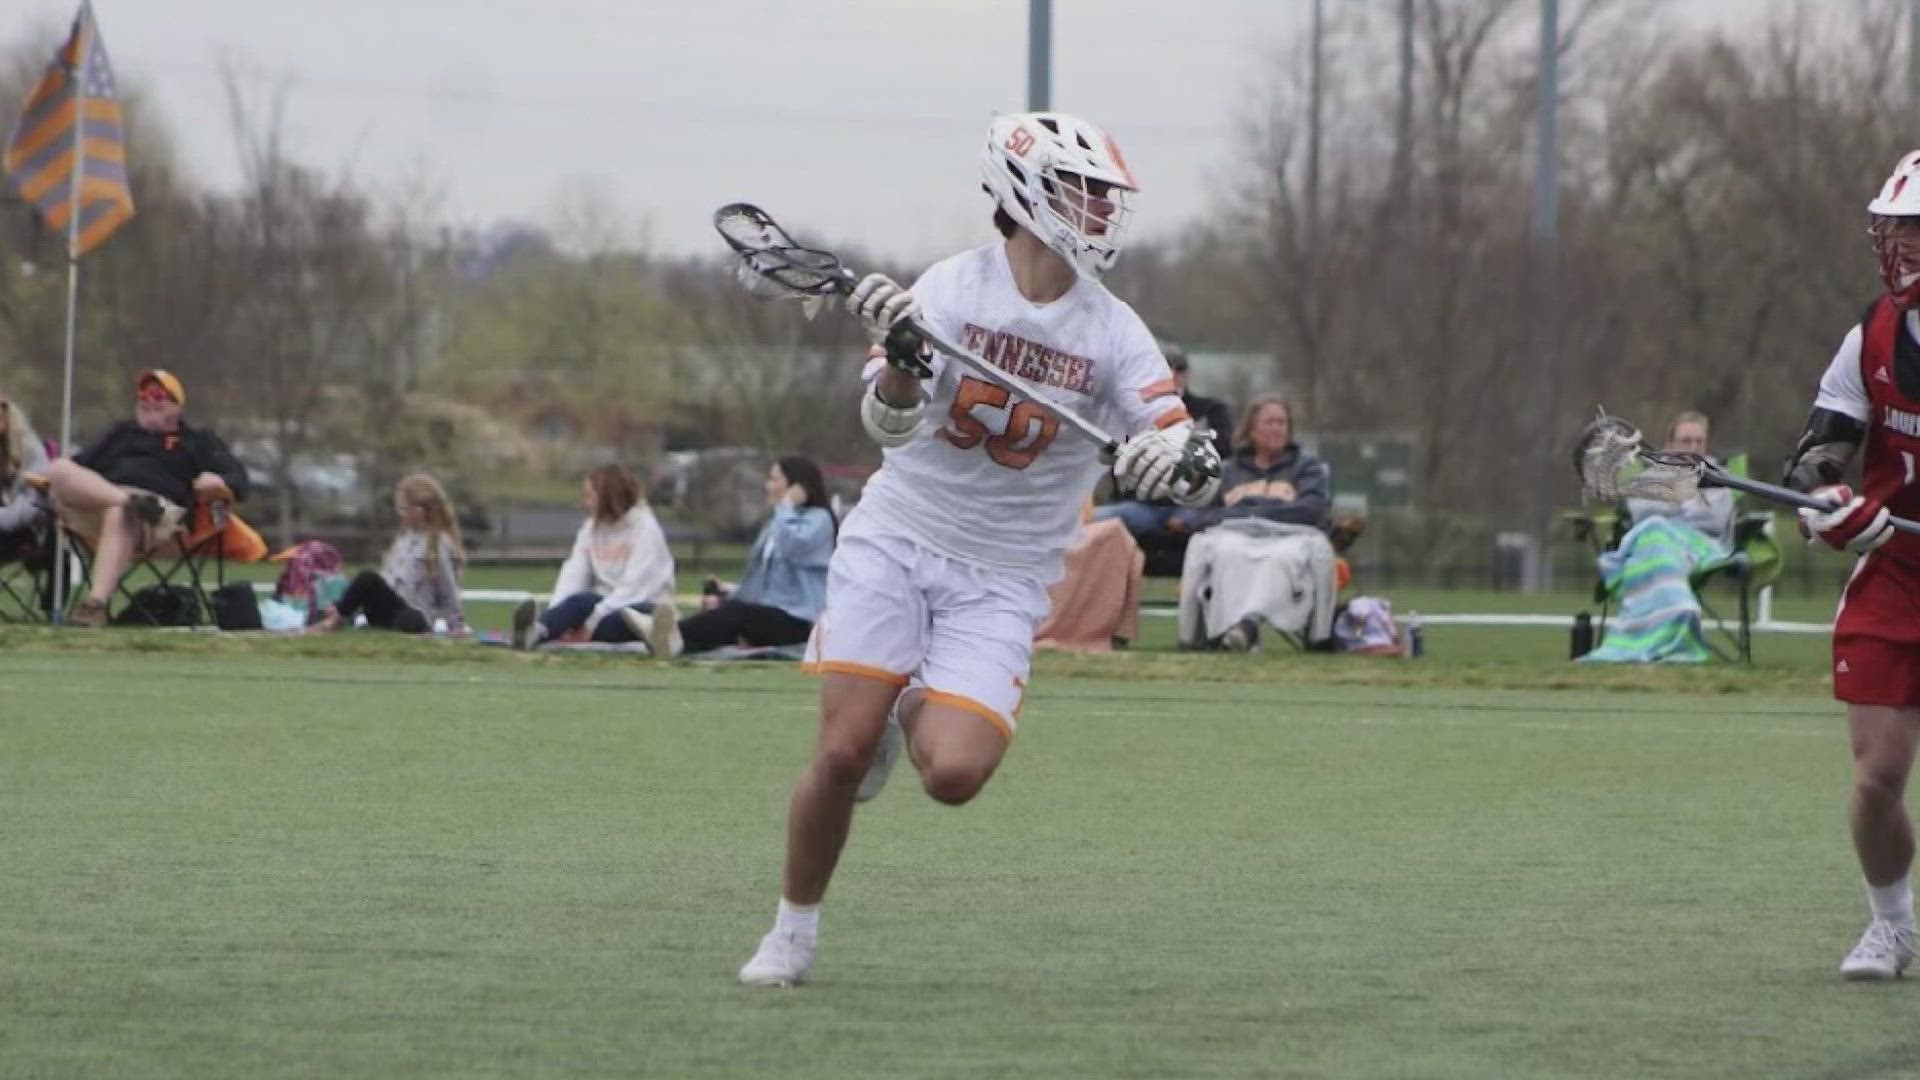 Tennessee lacrosse player, Jackson Zimmer, earned an NIL deal with lacrosse company East Coat Dyes this summer.